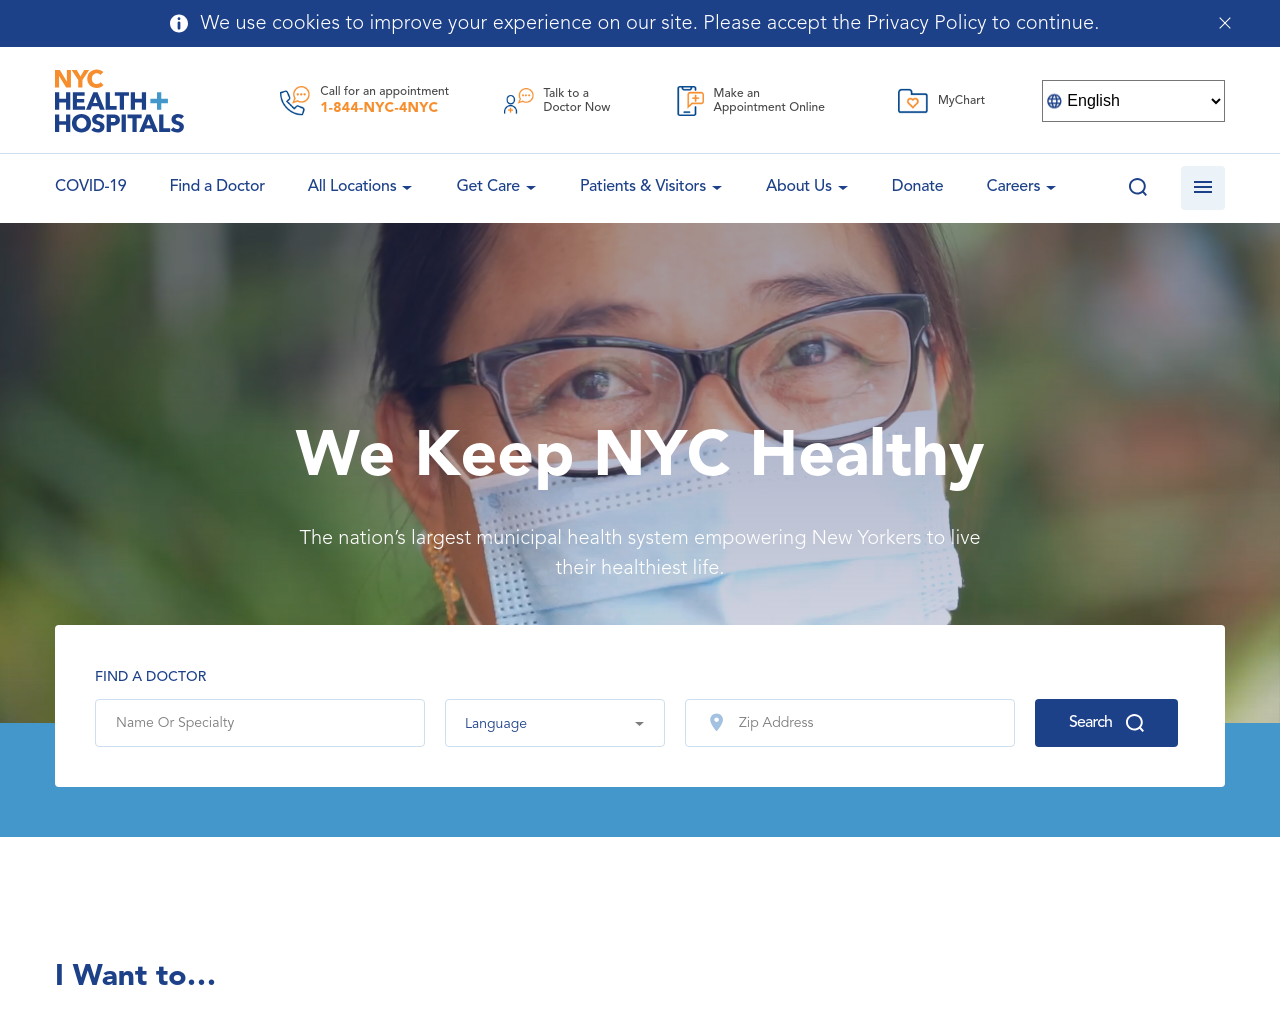 nychealthandhospitals.org